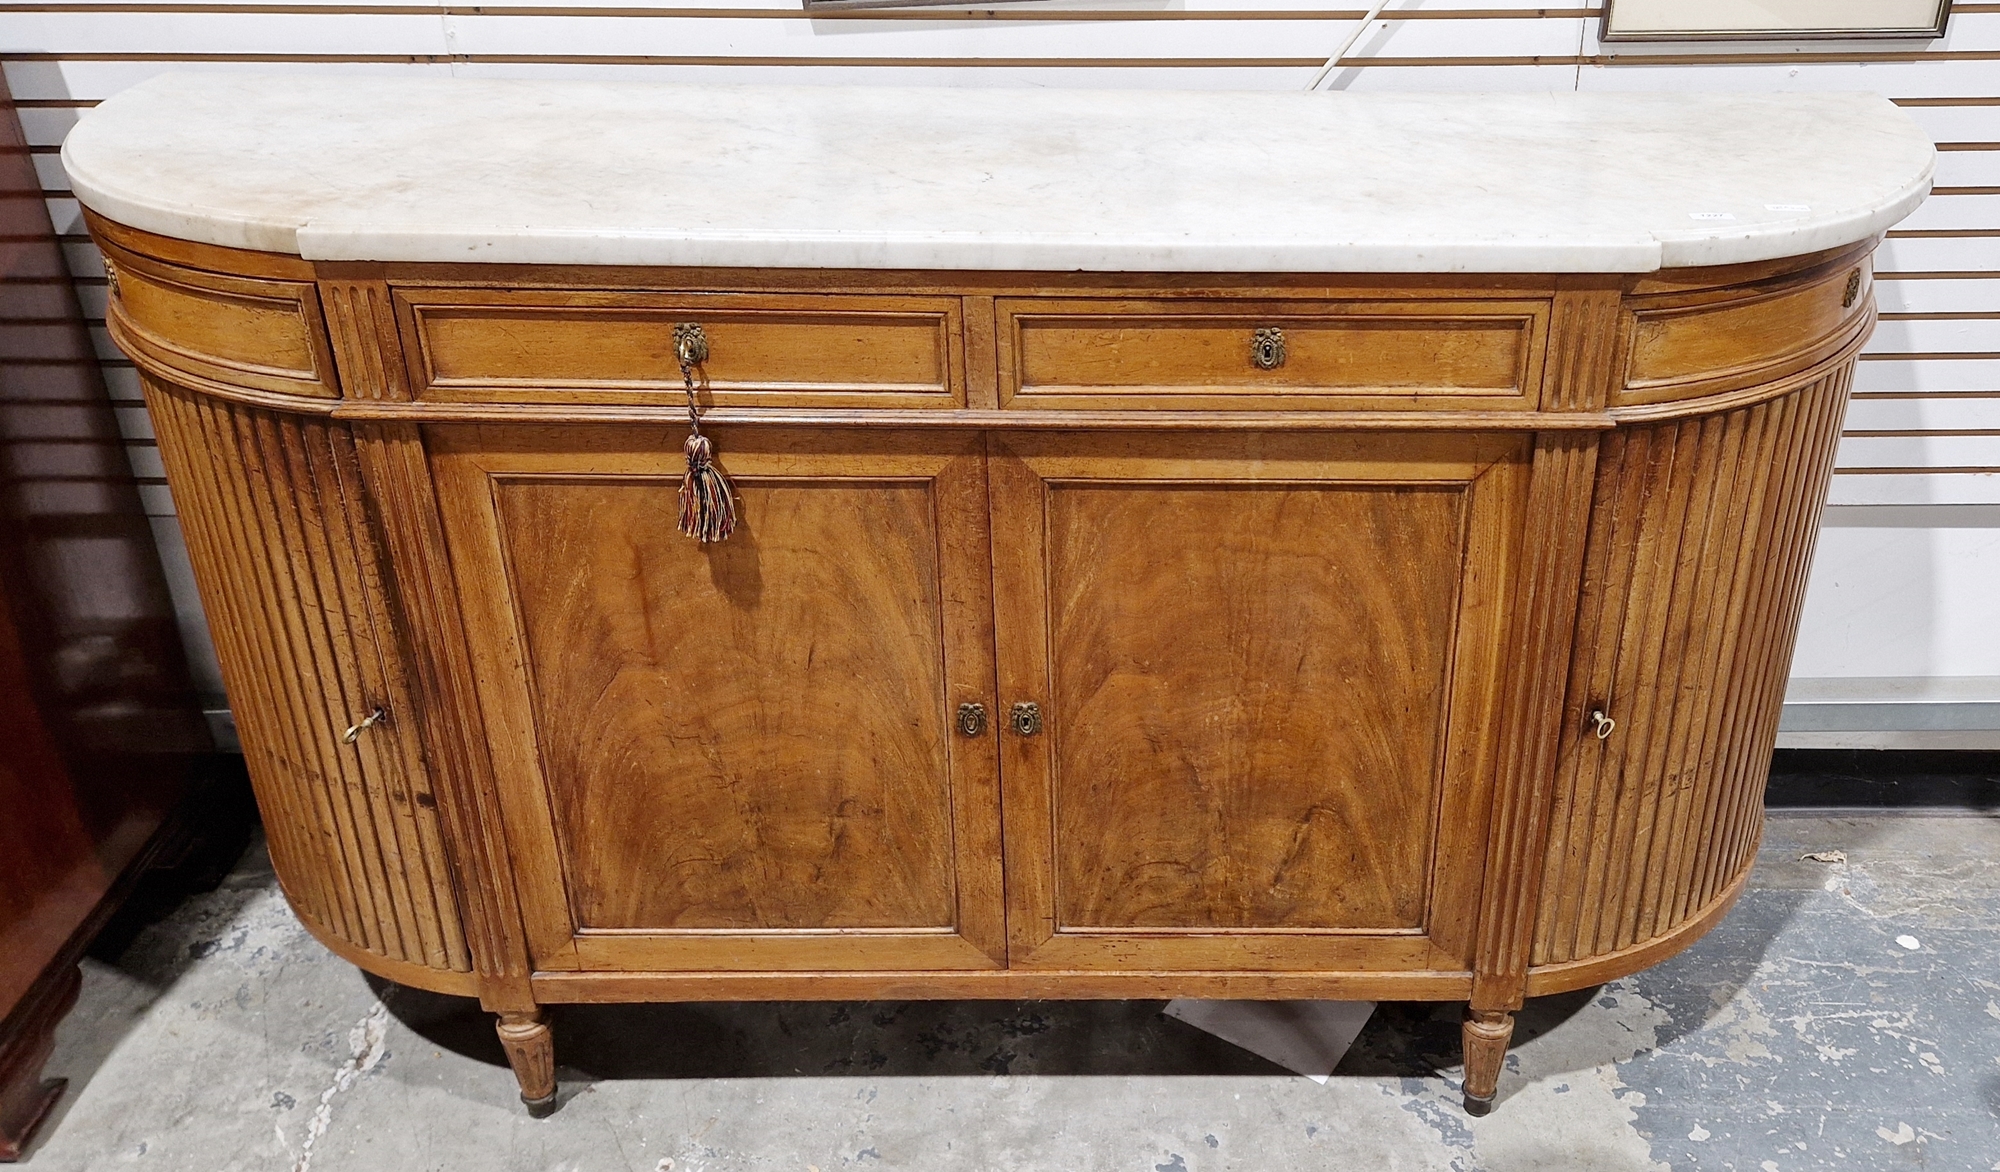 19th century French marble-topped walnut bowfronted sideboard having two short drawers over a two- - Image 2 of 2